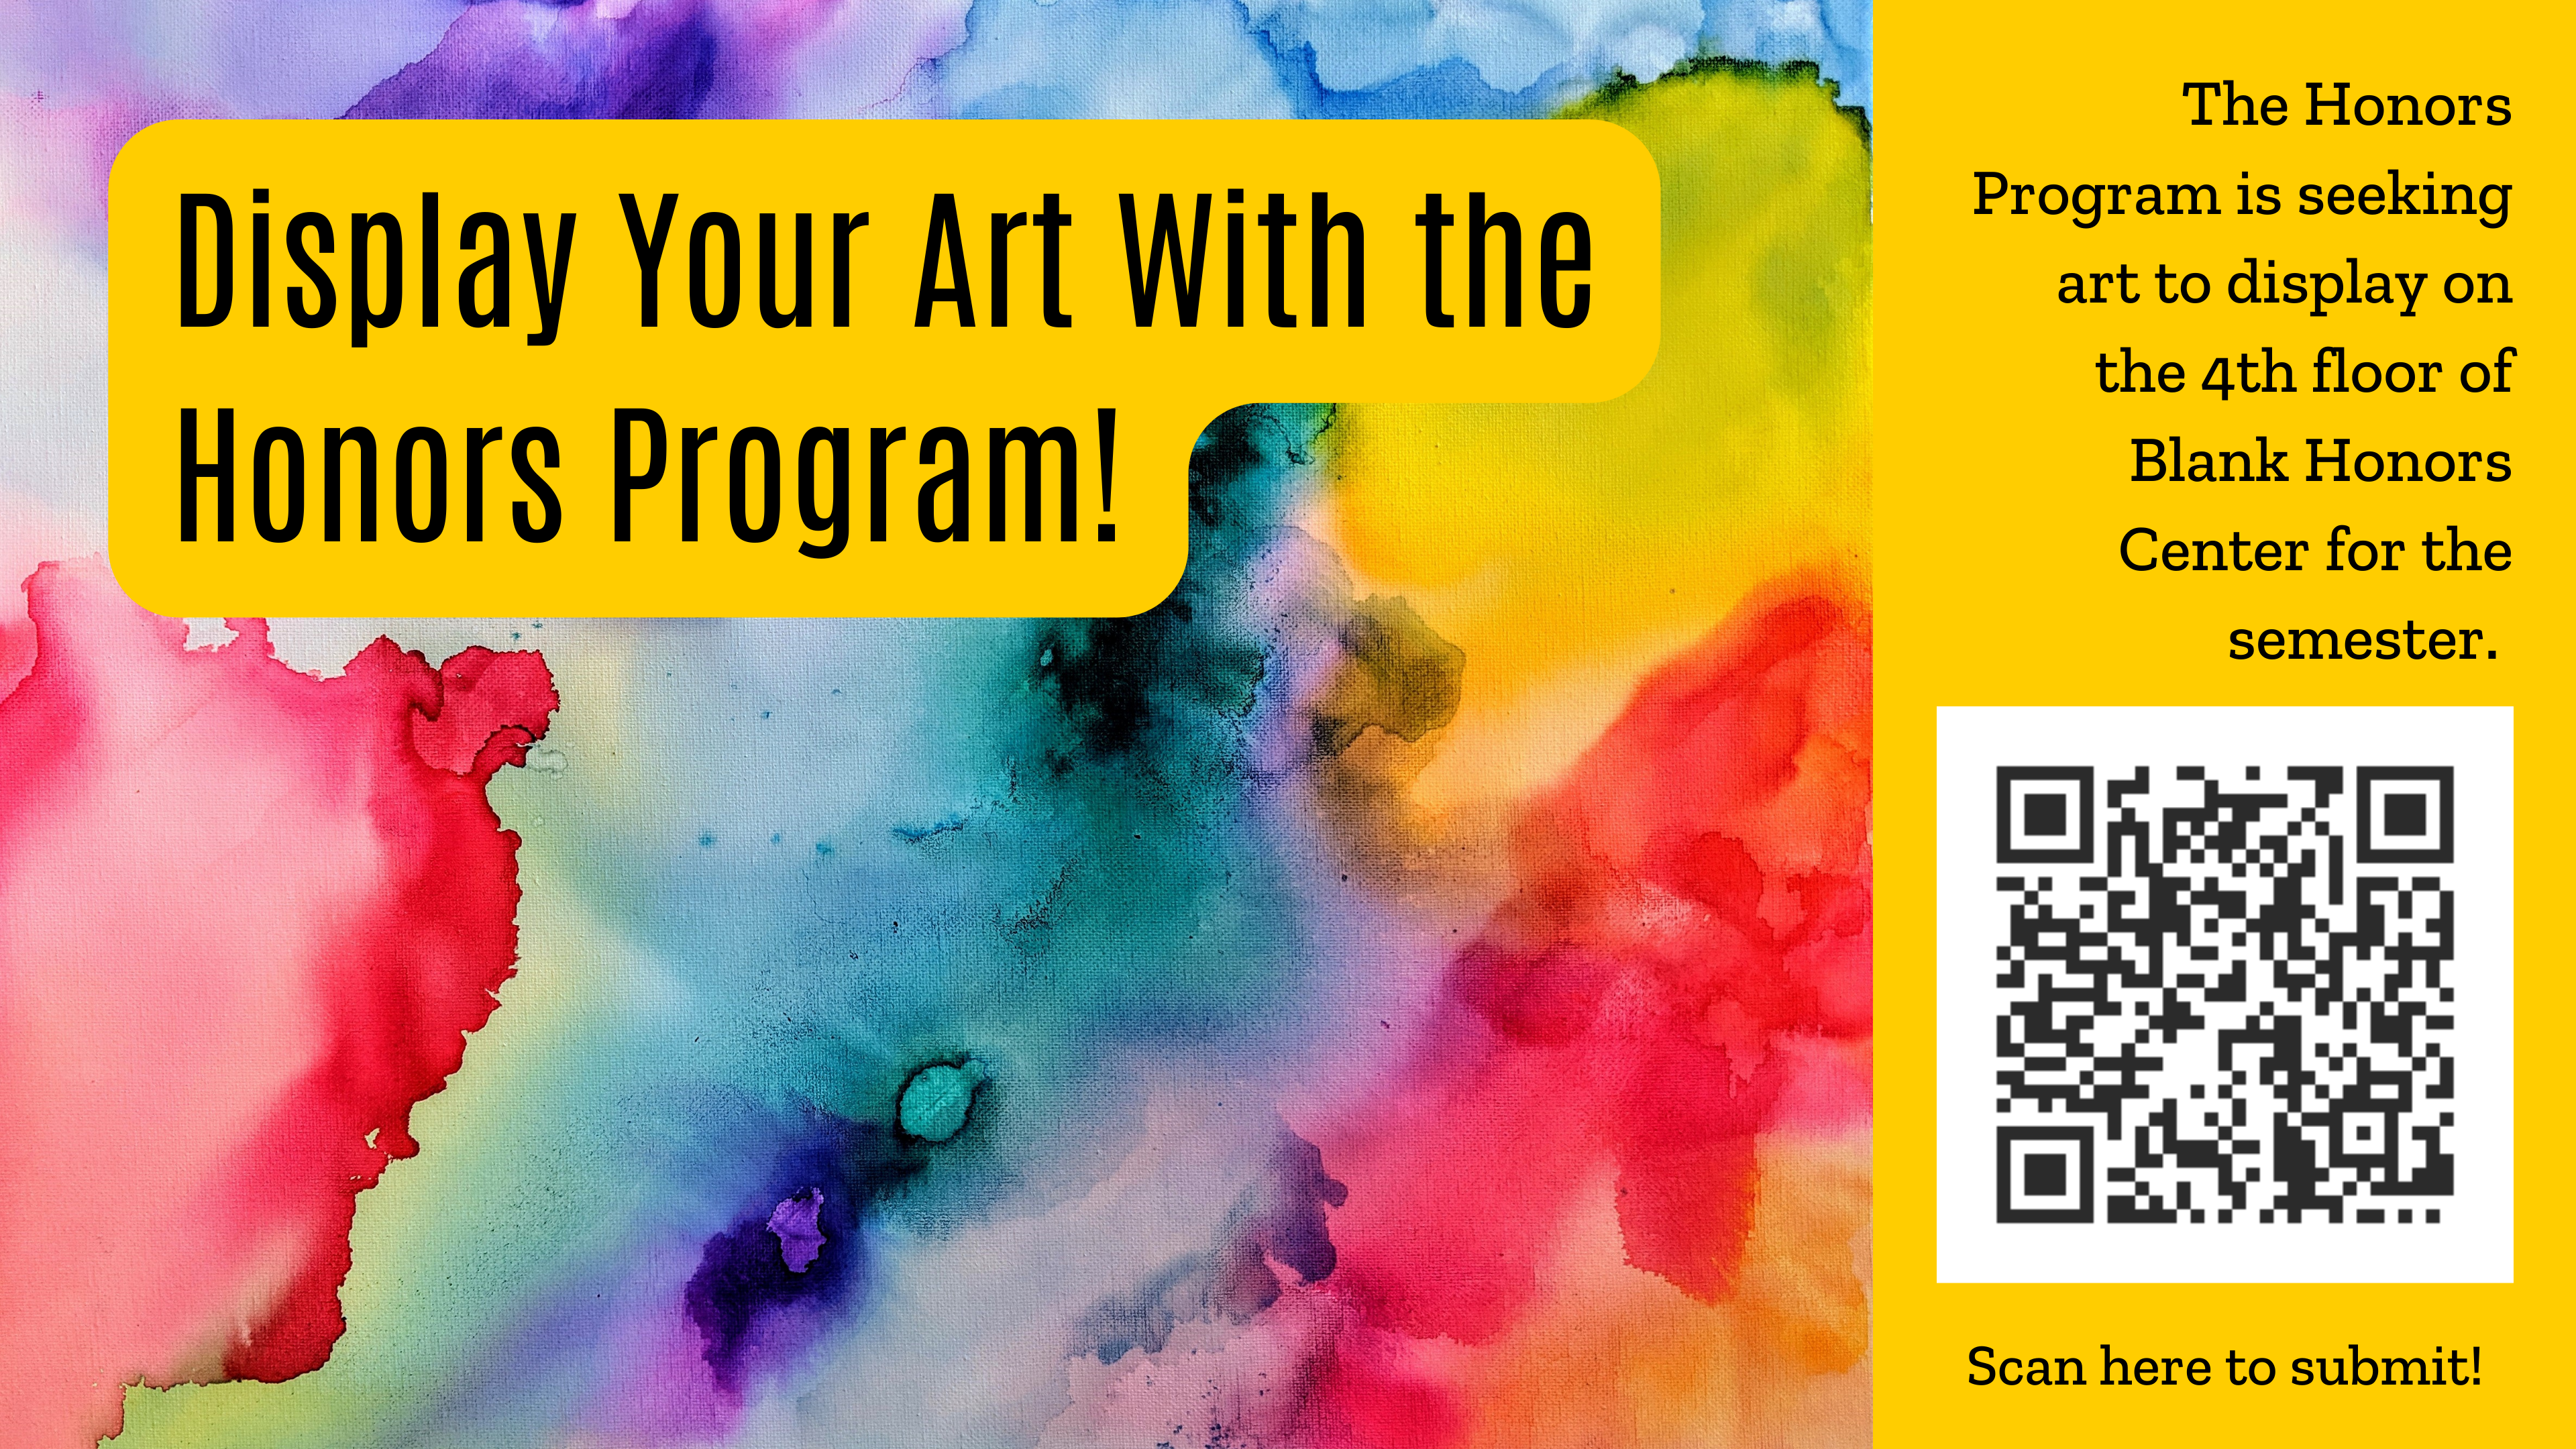 Display your art with the Honors Program! We are looking for pieces to display during the Spring semester.